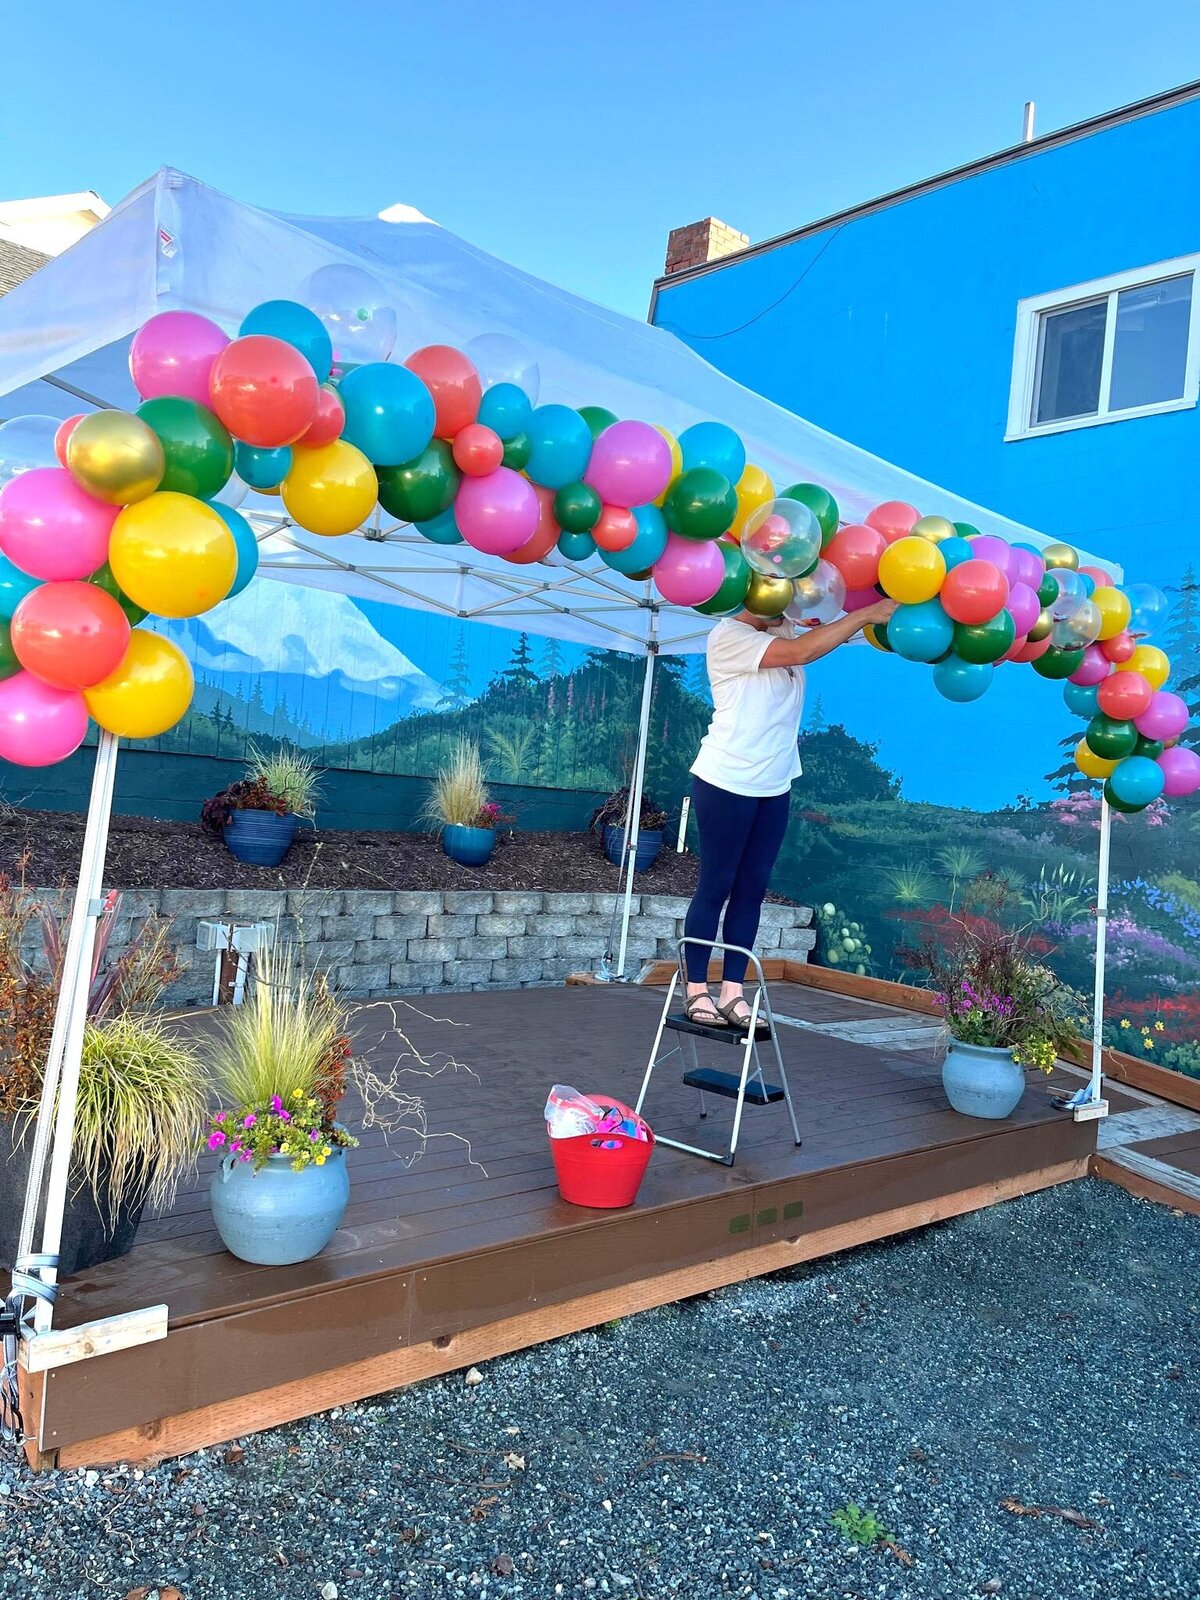 ISLAND INFLATABLES BALLOON DESIGNS GARLAND - WHIDBEY